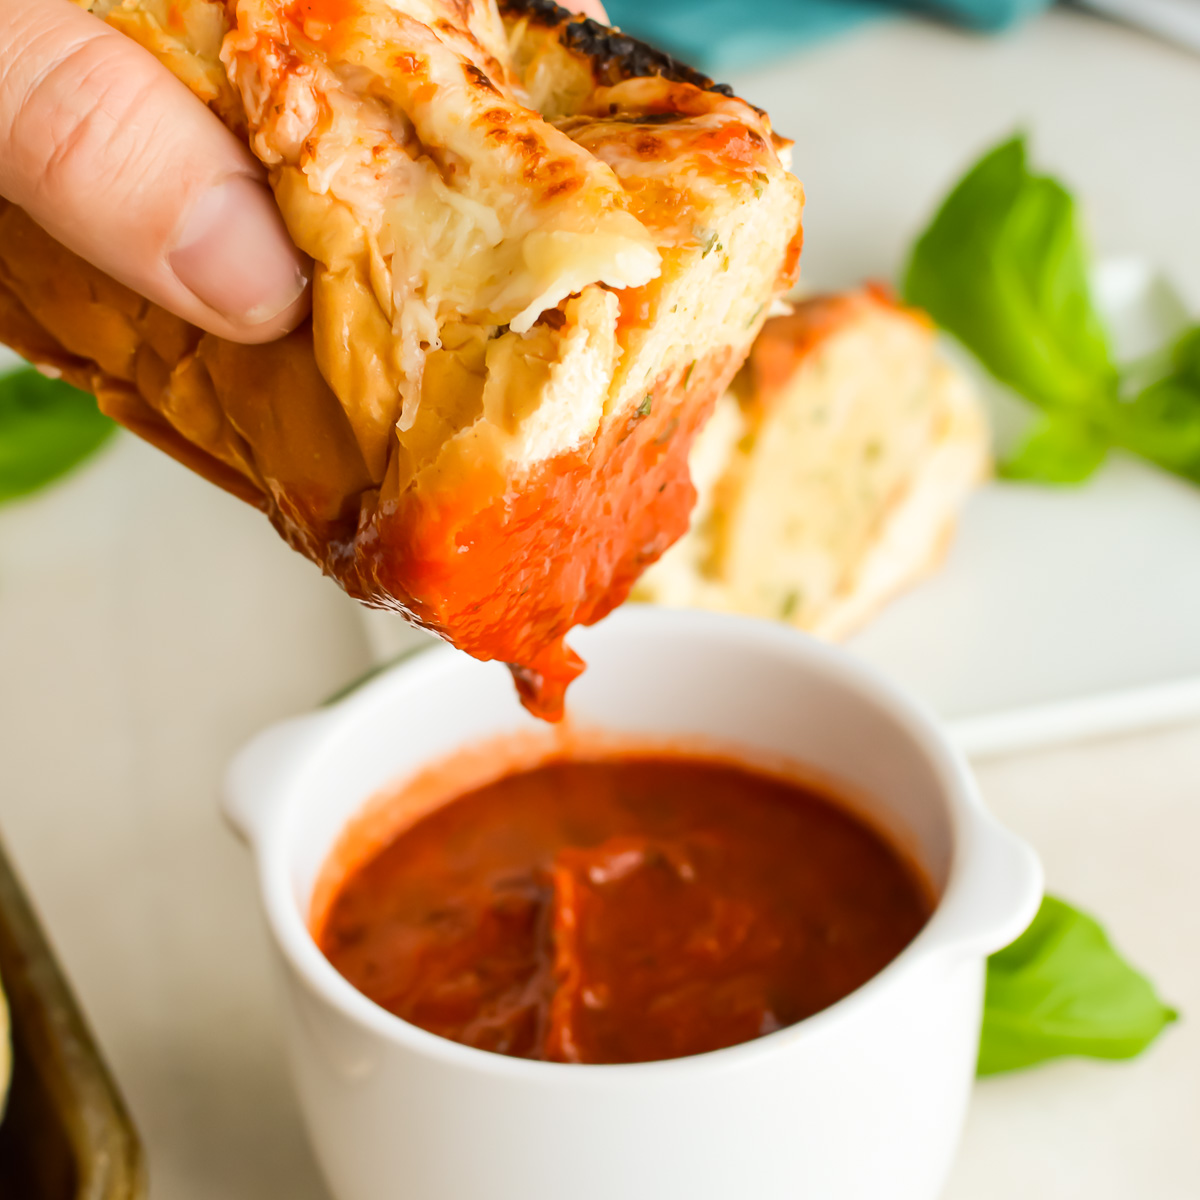 Hand dipping a Chicken Meatball Sub into tomato sauce.